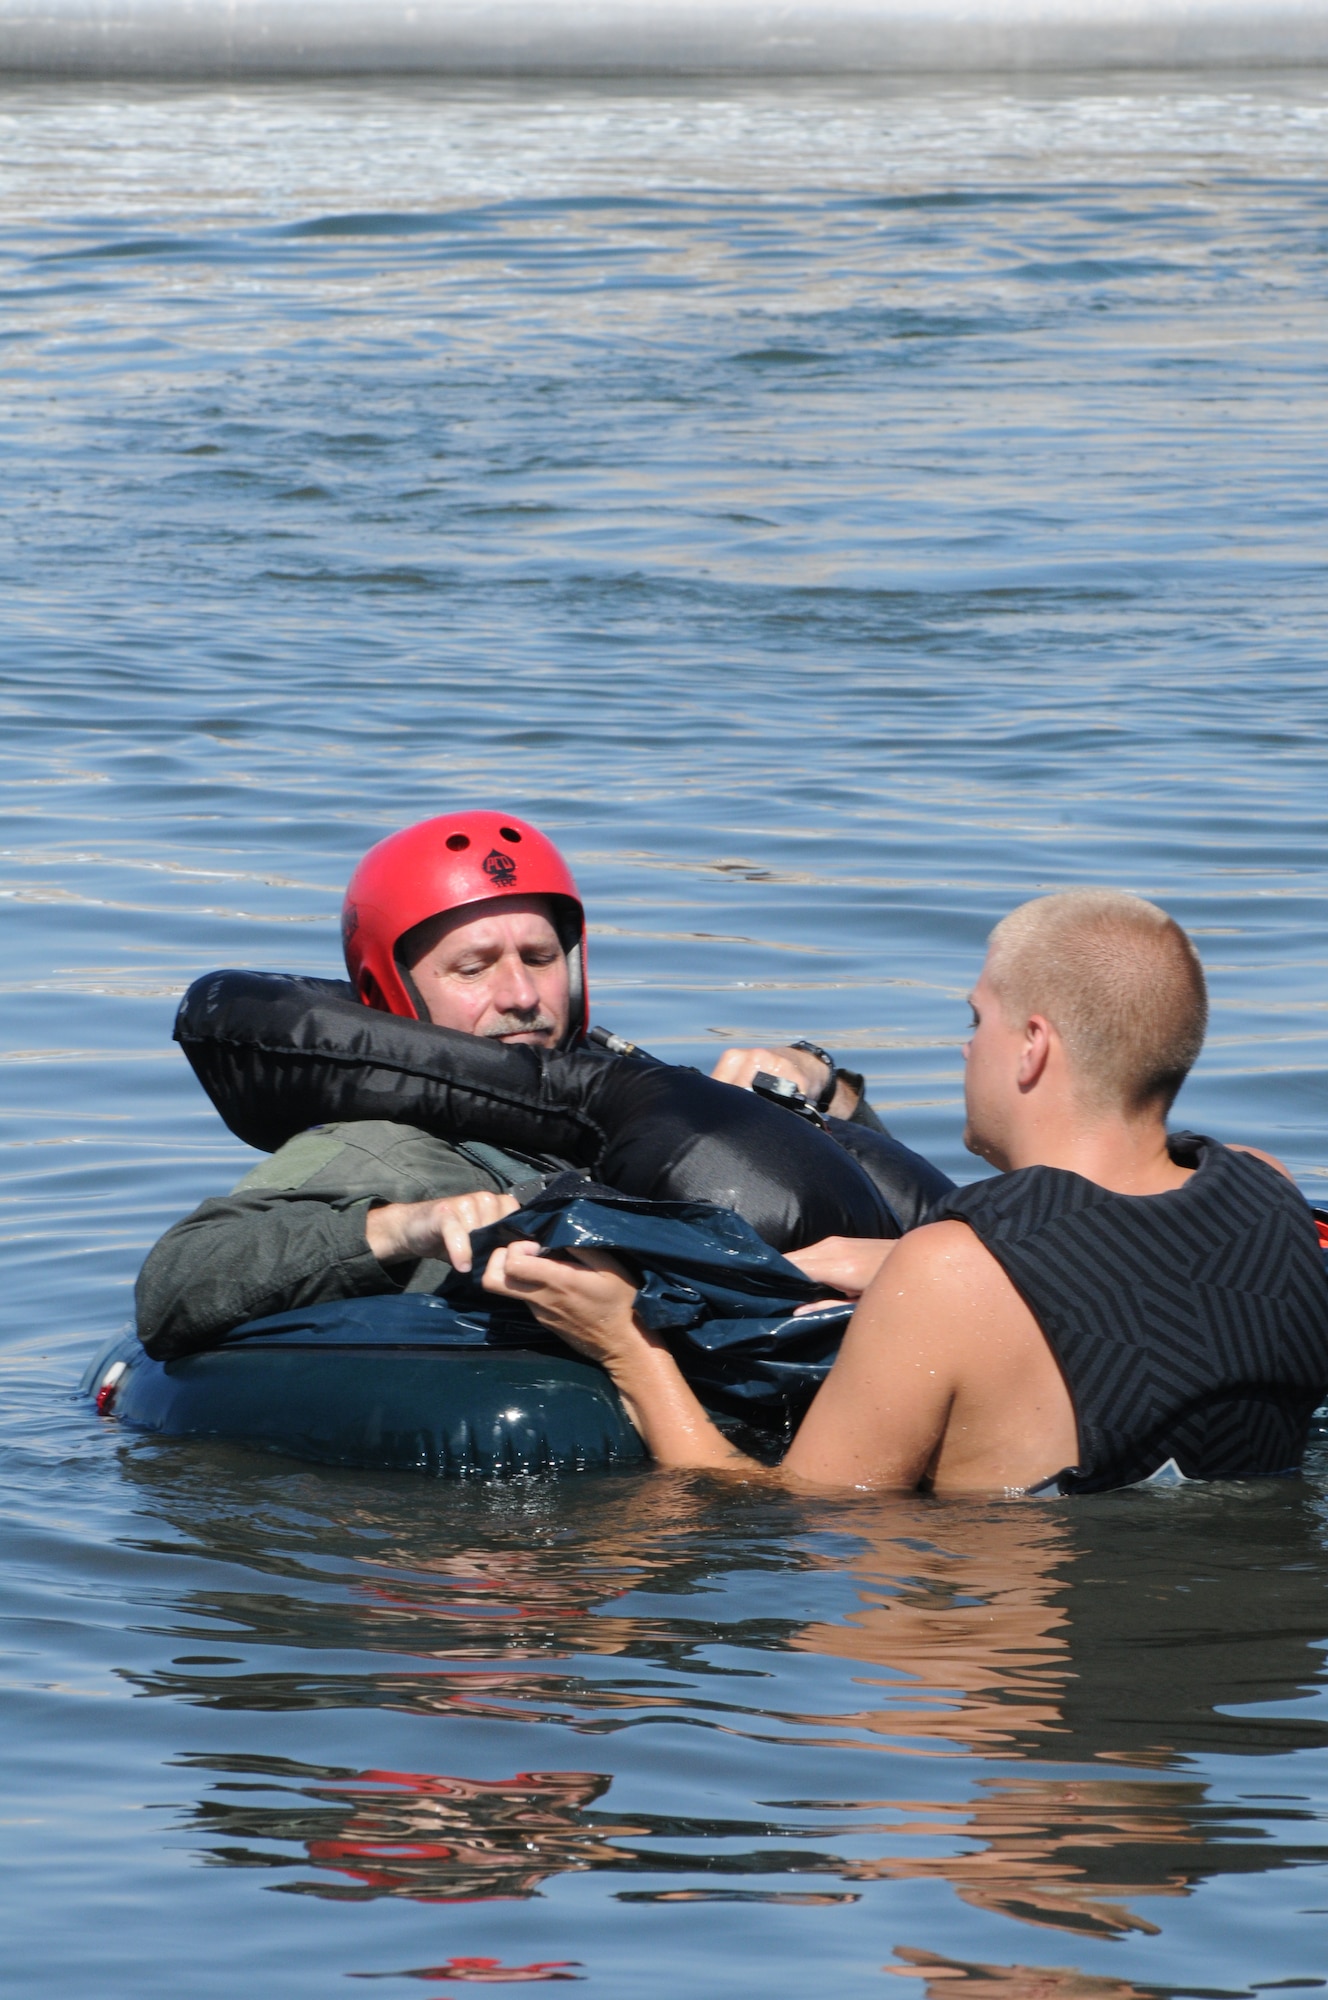 Senior Airman Bo Martz reviews the one-man liferaft with Col. Mathew Jamison during Survival training at Brant Lake, S.D., Aug. 8 2010. (Air Force Photo by Master Sgt. Christopher Stewart, 114th Fighter Wing)